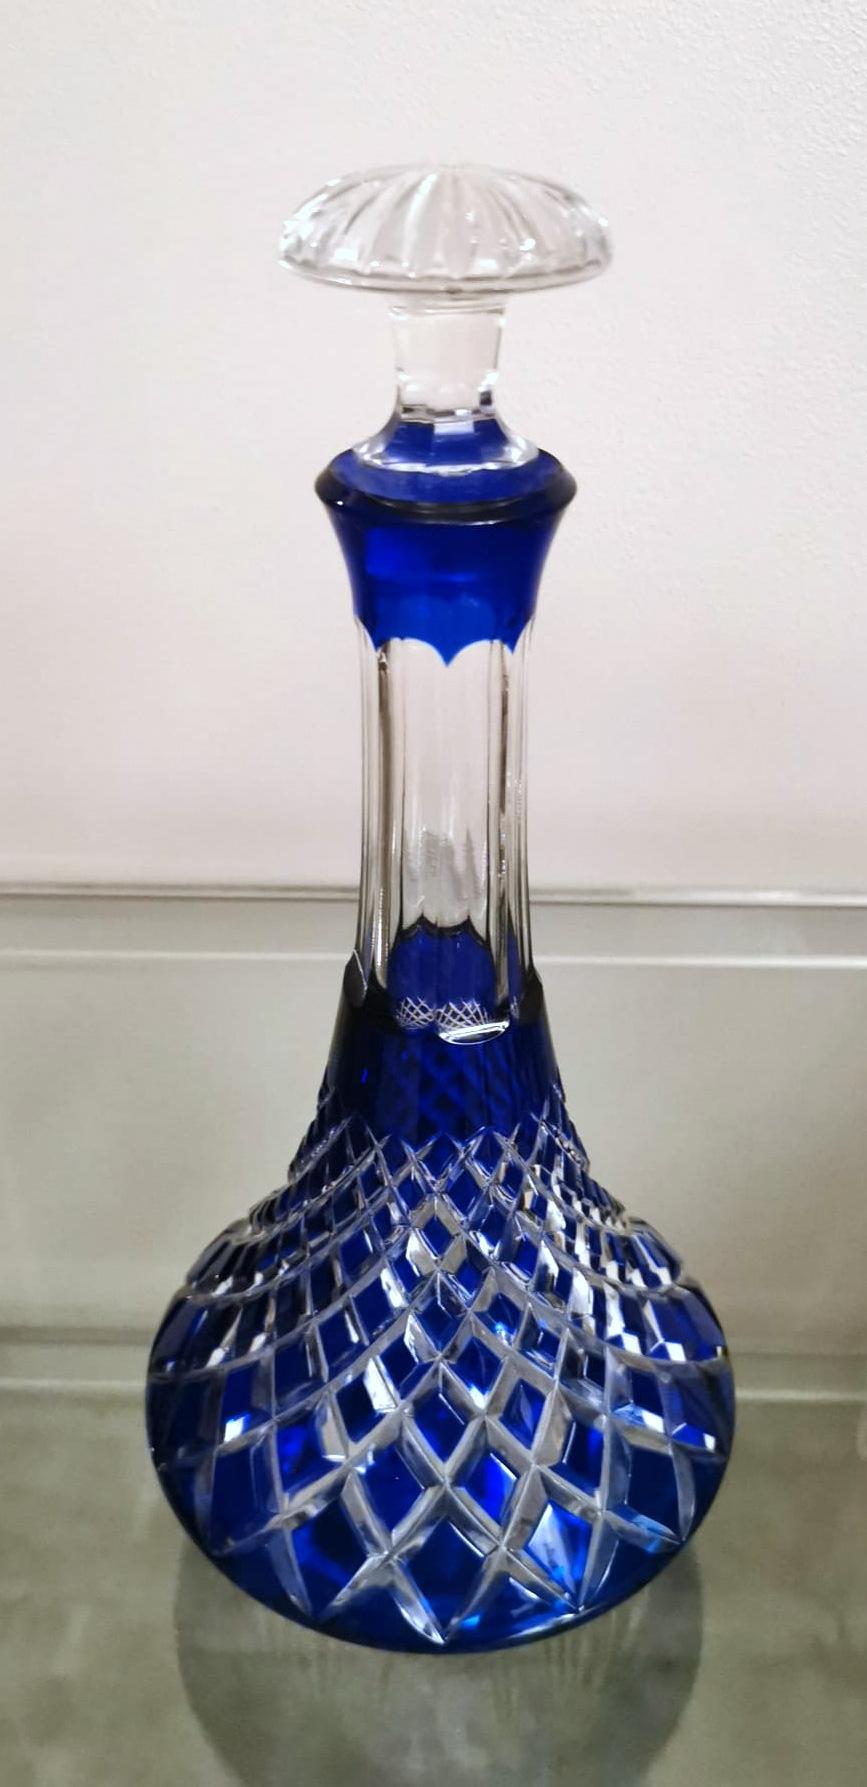 We kindly suggest you read the whole description, because with it we try to give you detailed technical and historical information to guarantee the authenticity of our objects.
Bottle made of blue crystal cut and ground by hand; for its